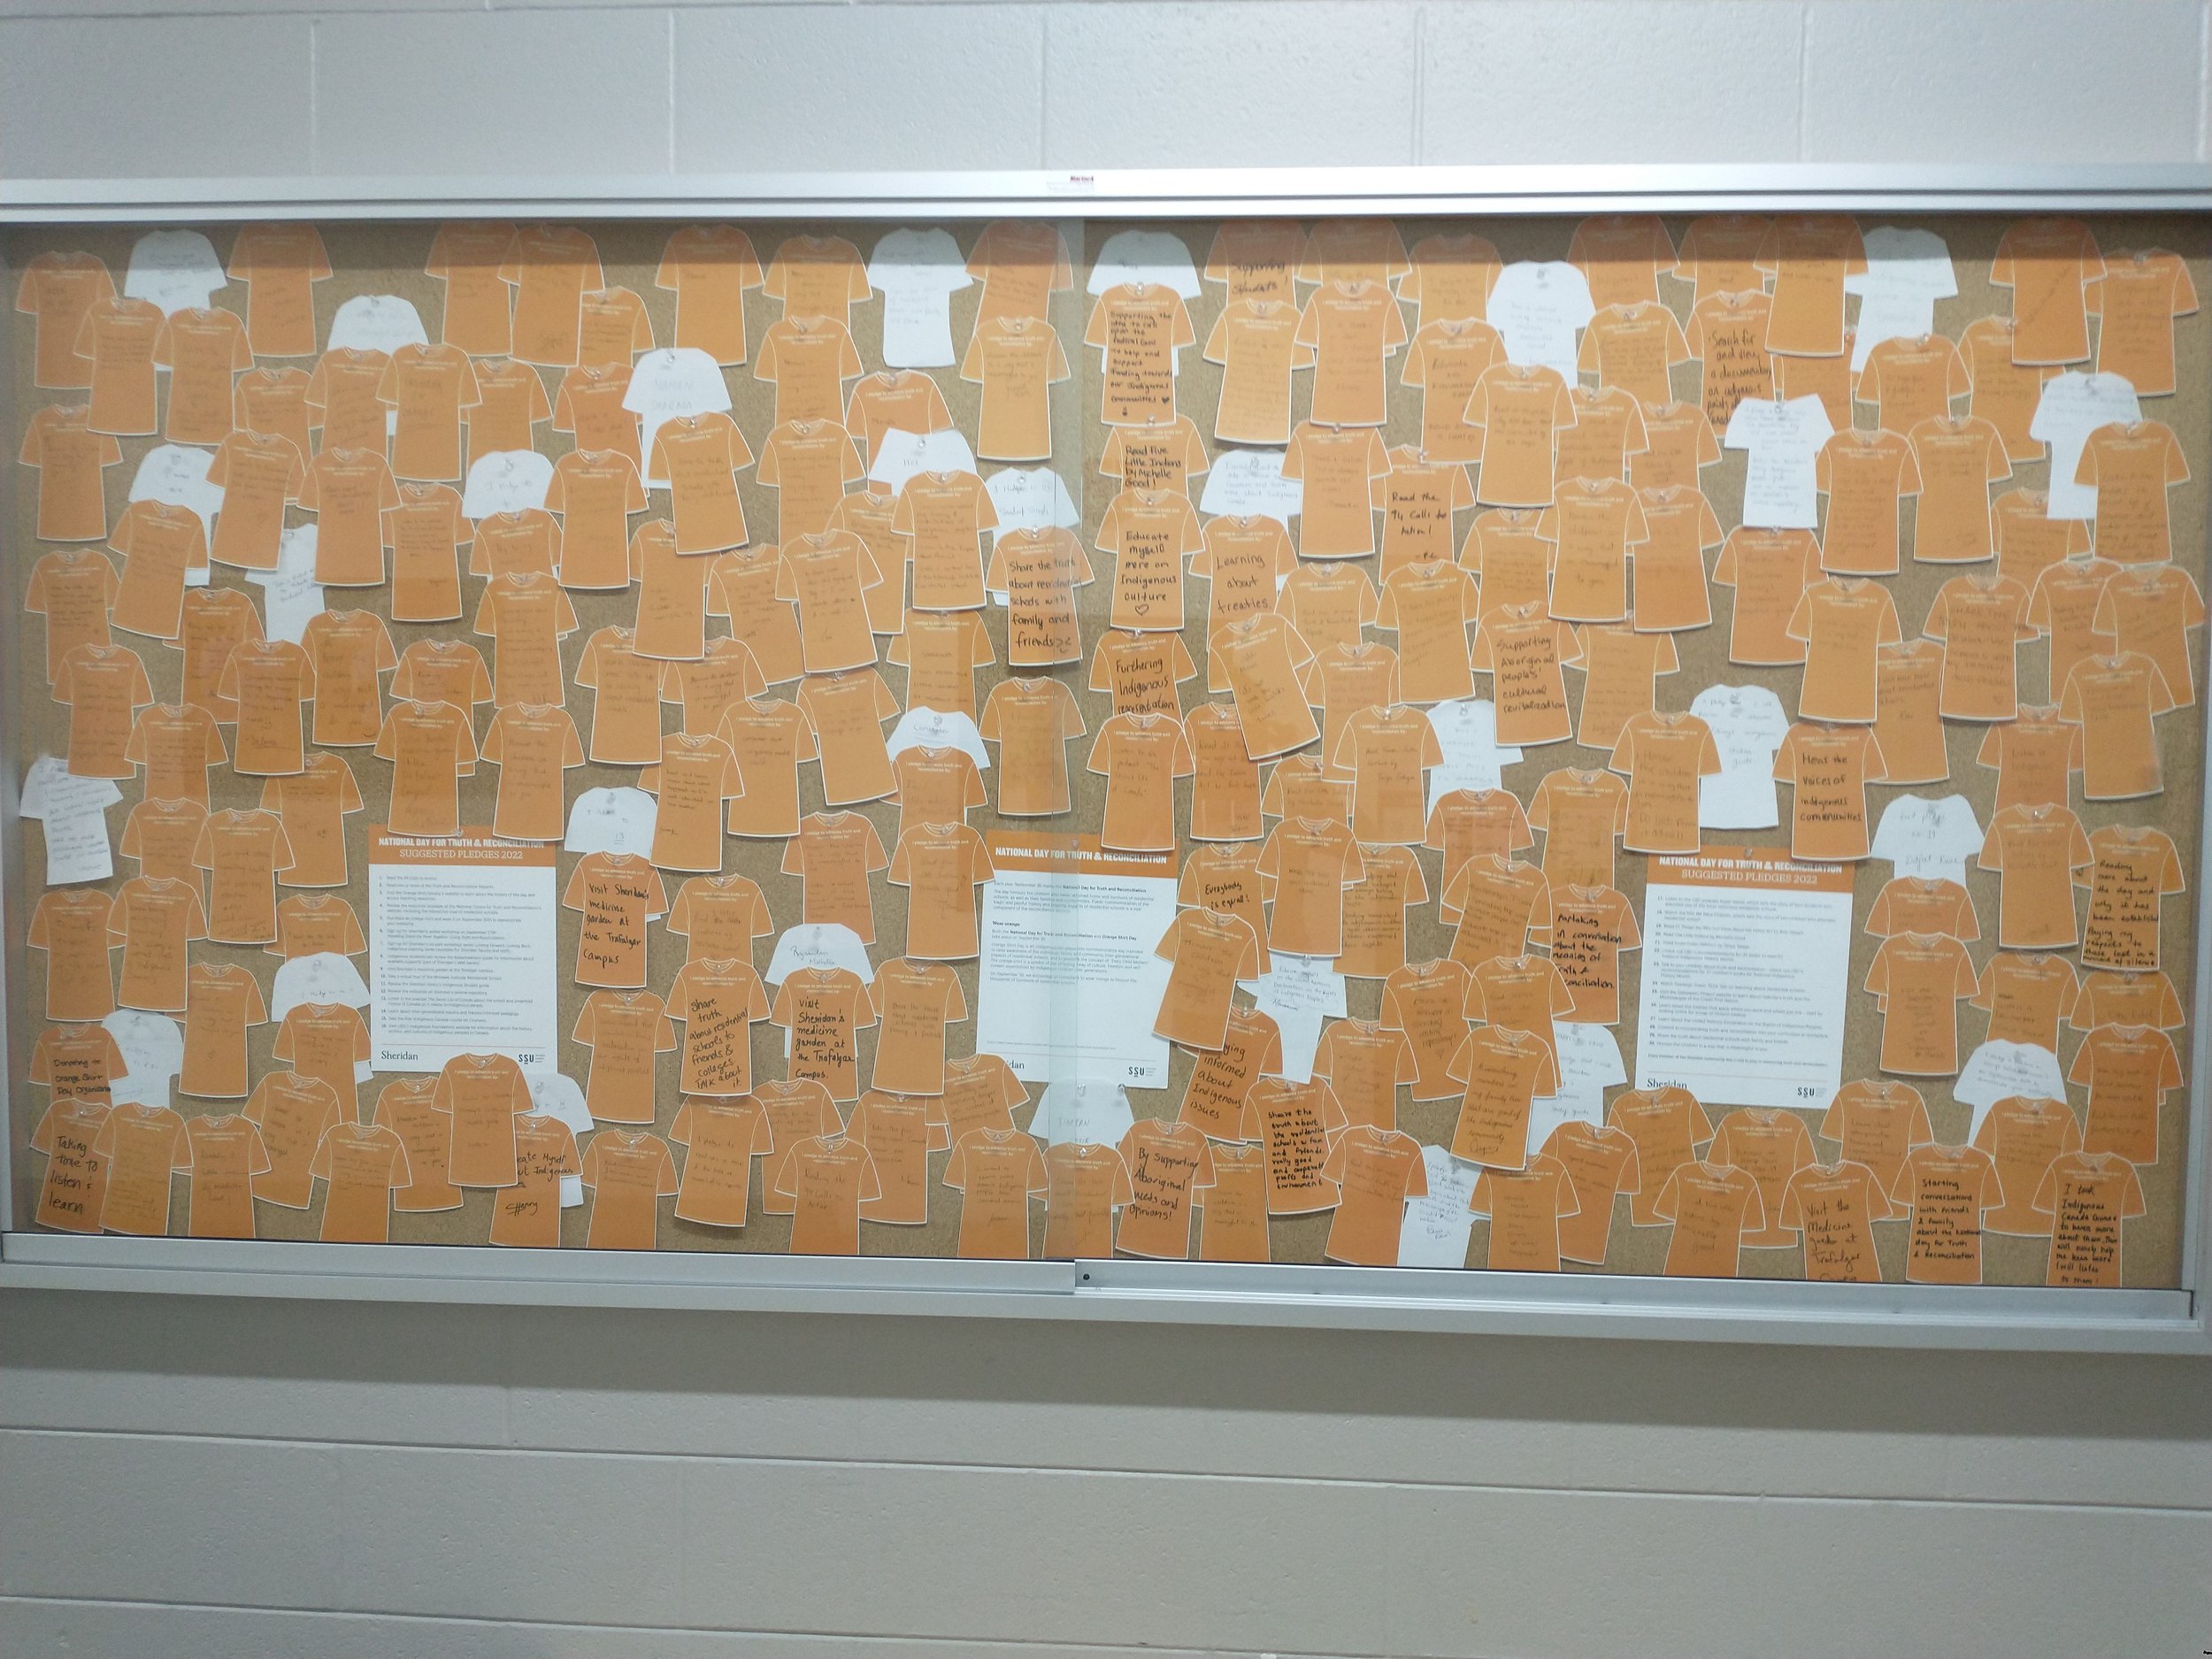  A board with paper orange shirts posted on the wall with encouraging and hopeful message. 